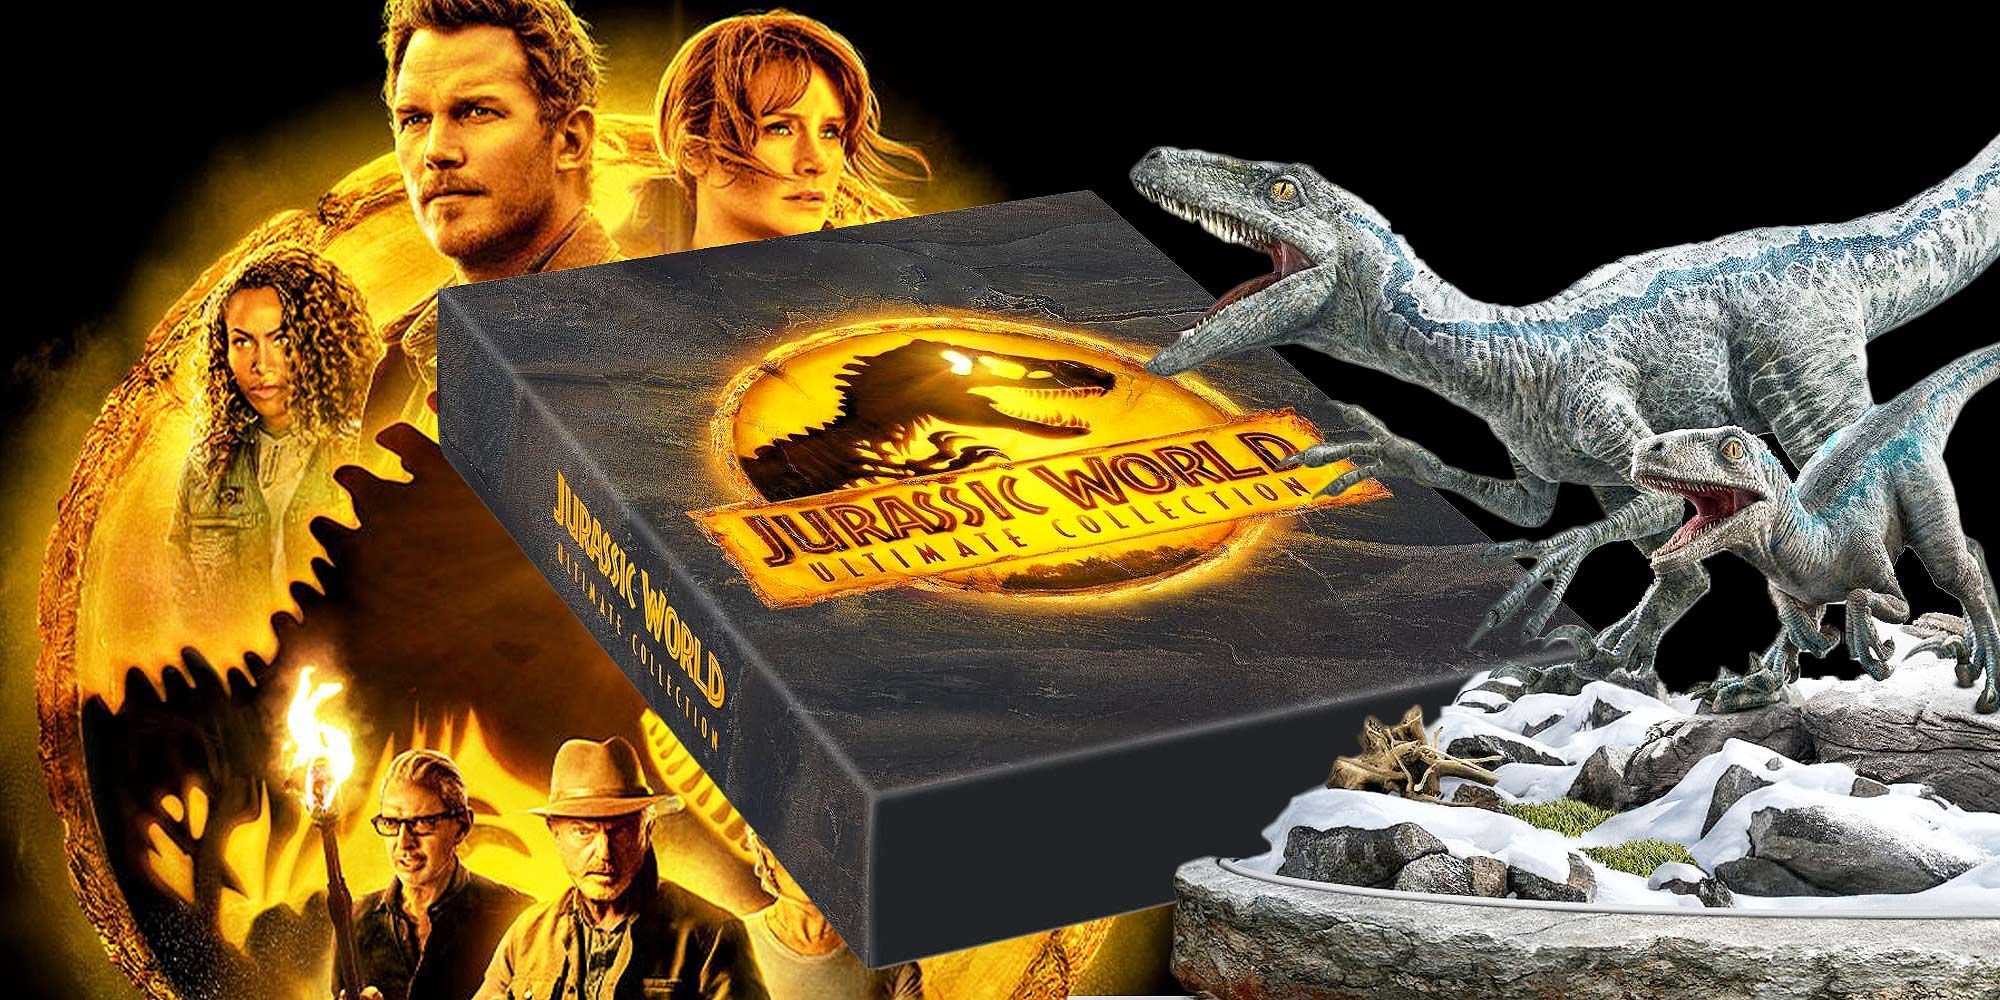 jurassic world dominion extended edition blu-ray 4K